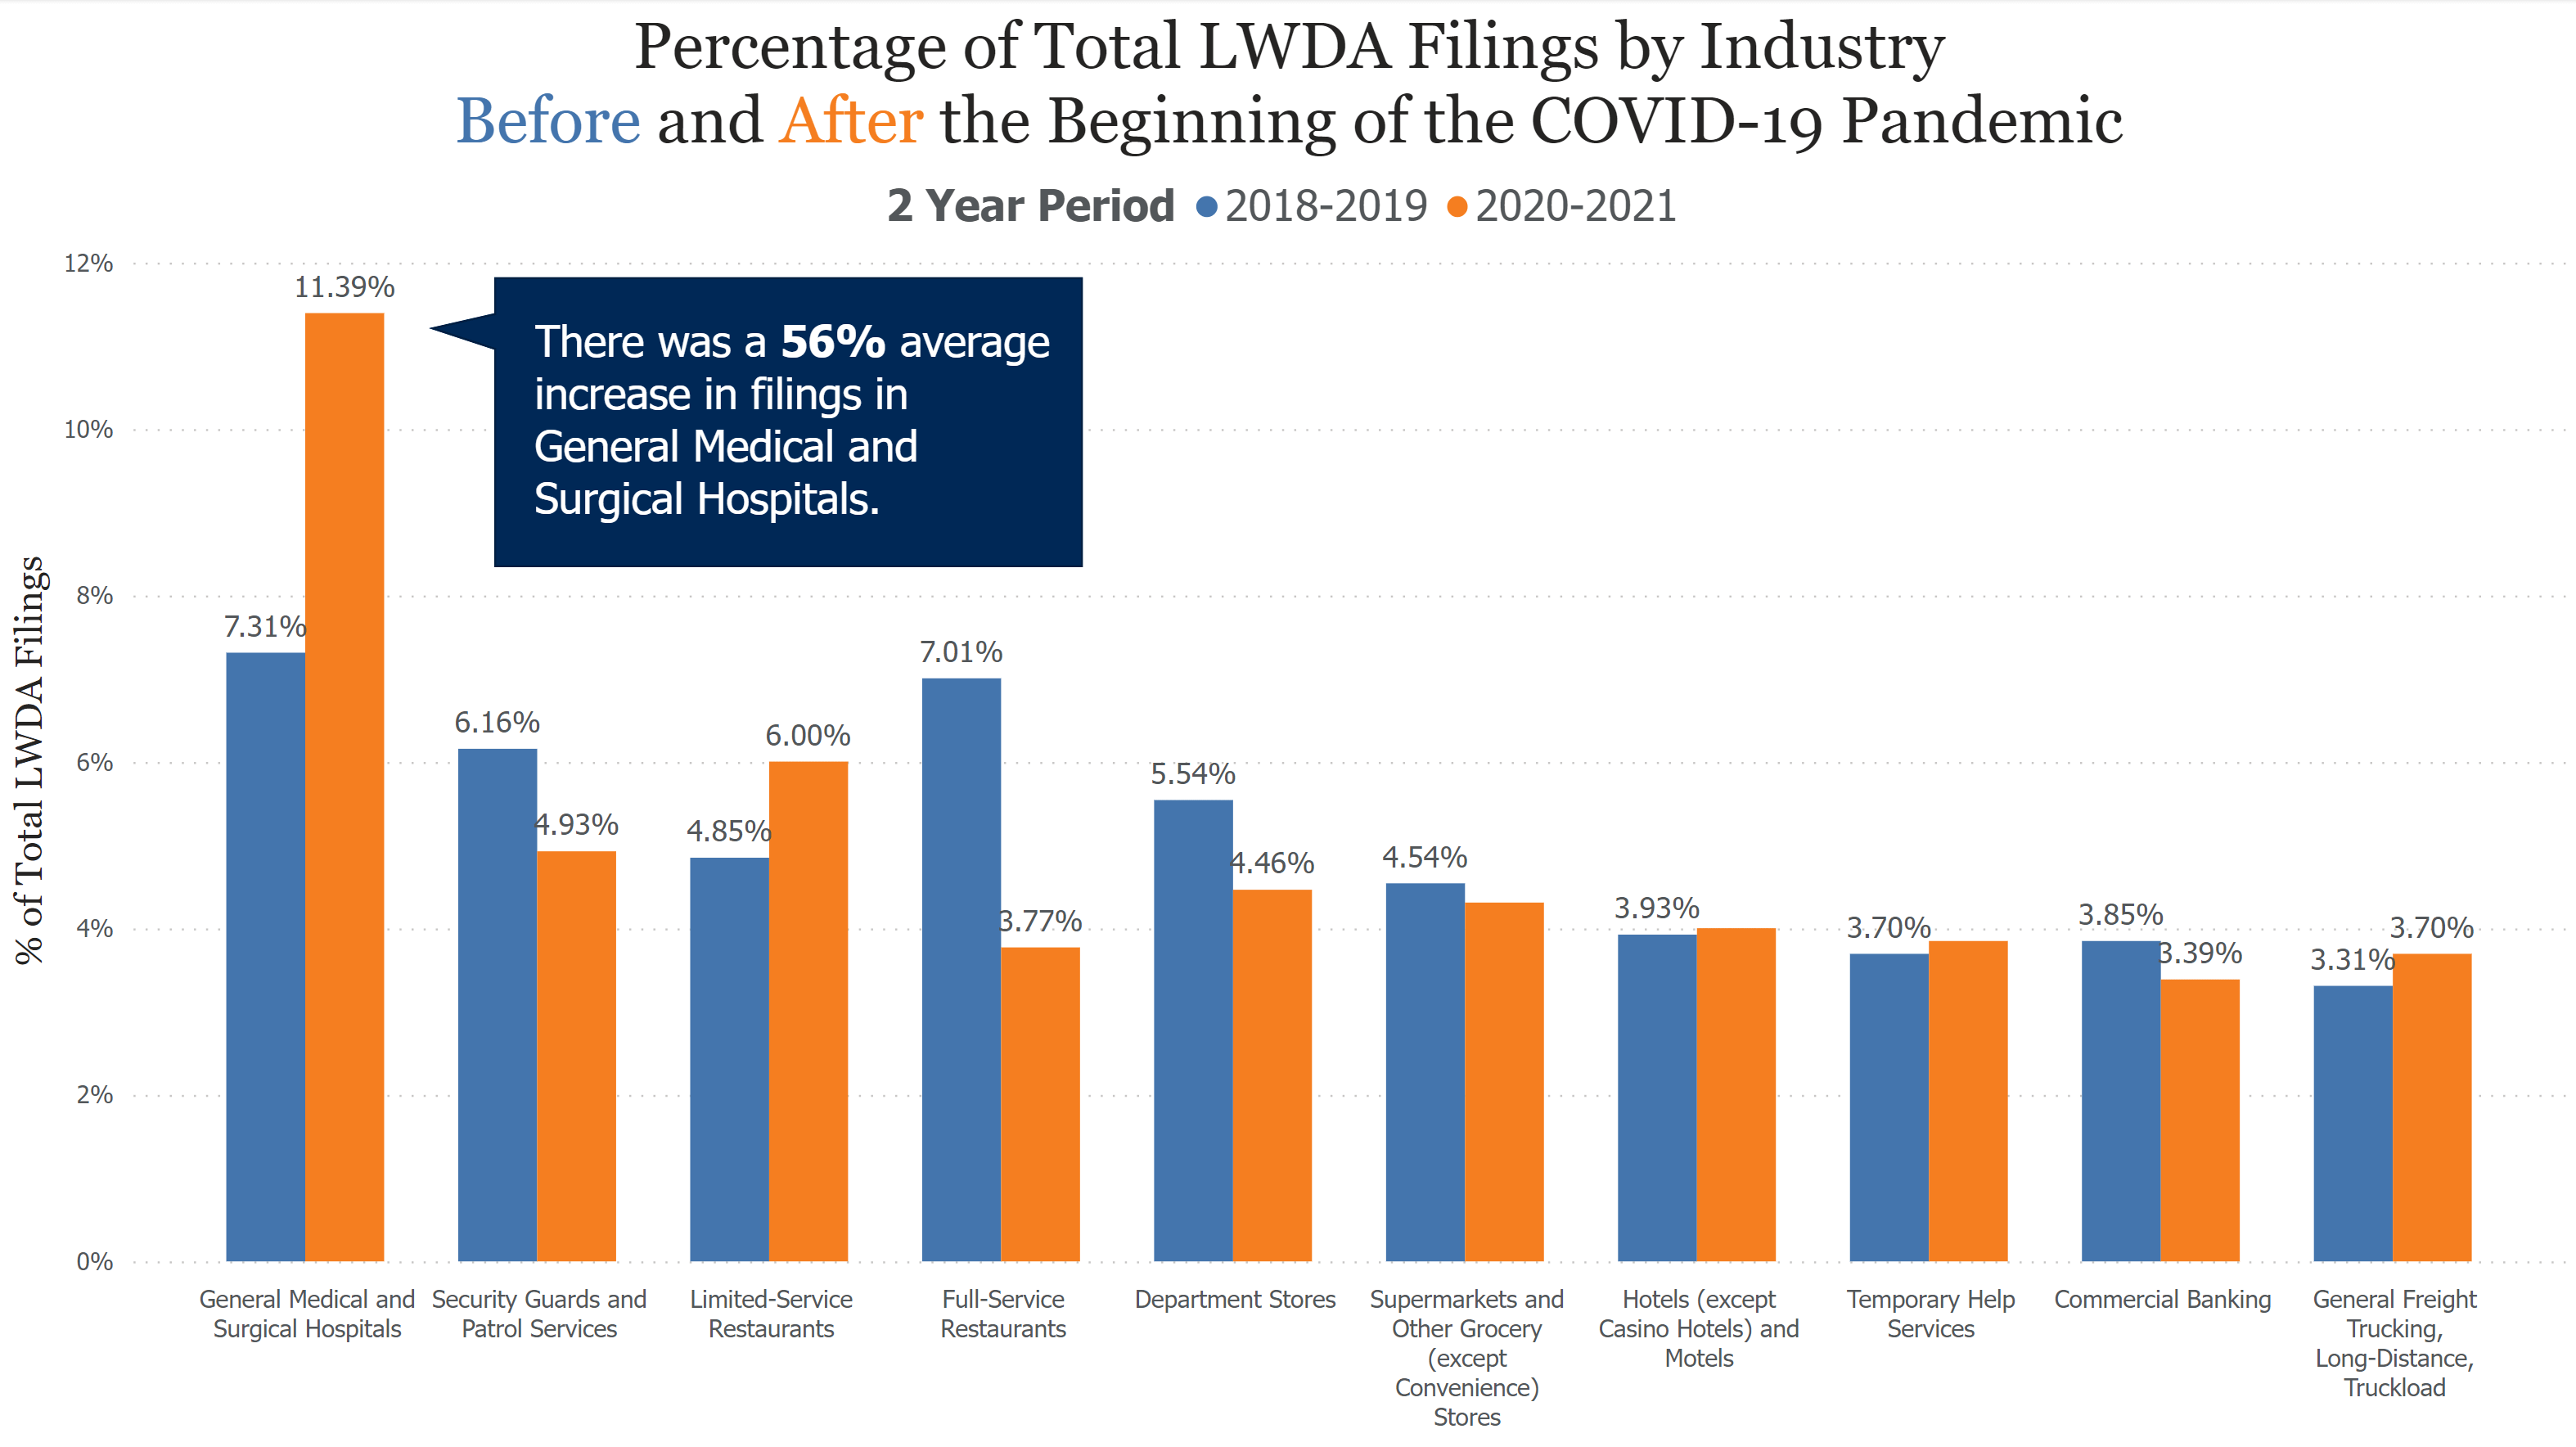 Percentage of total LDWA filings by industry before and after the beginning of the COVID-19 pandemic chart